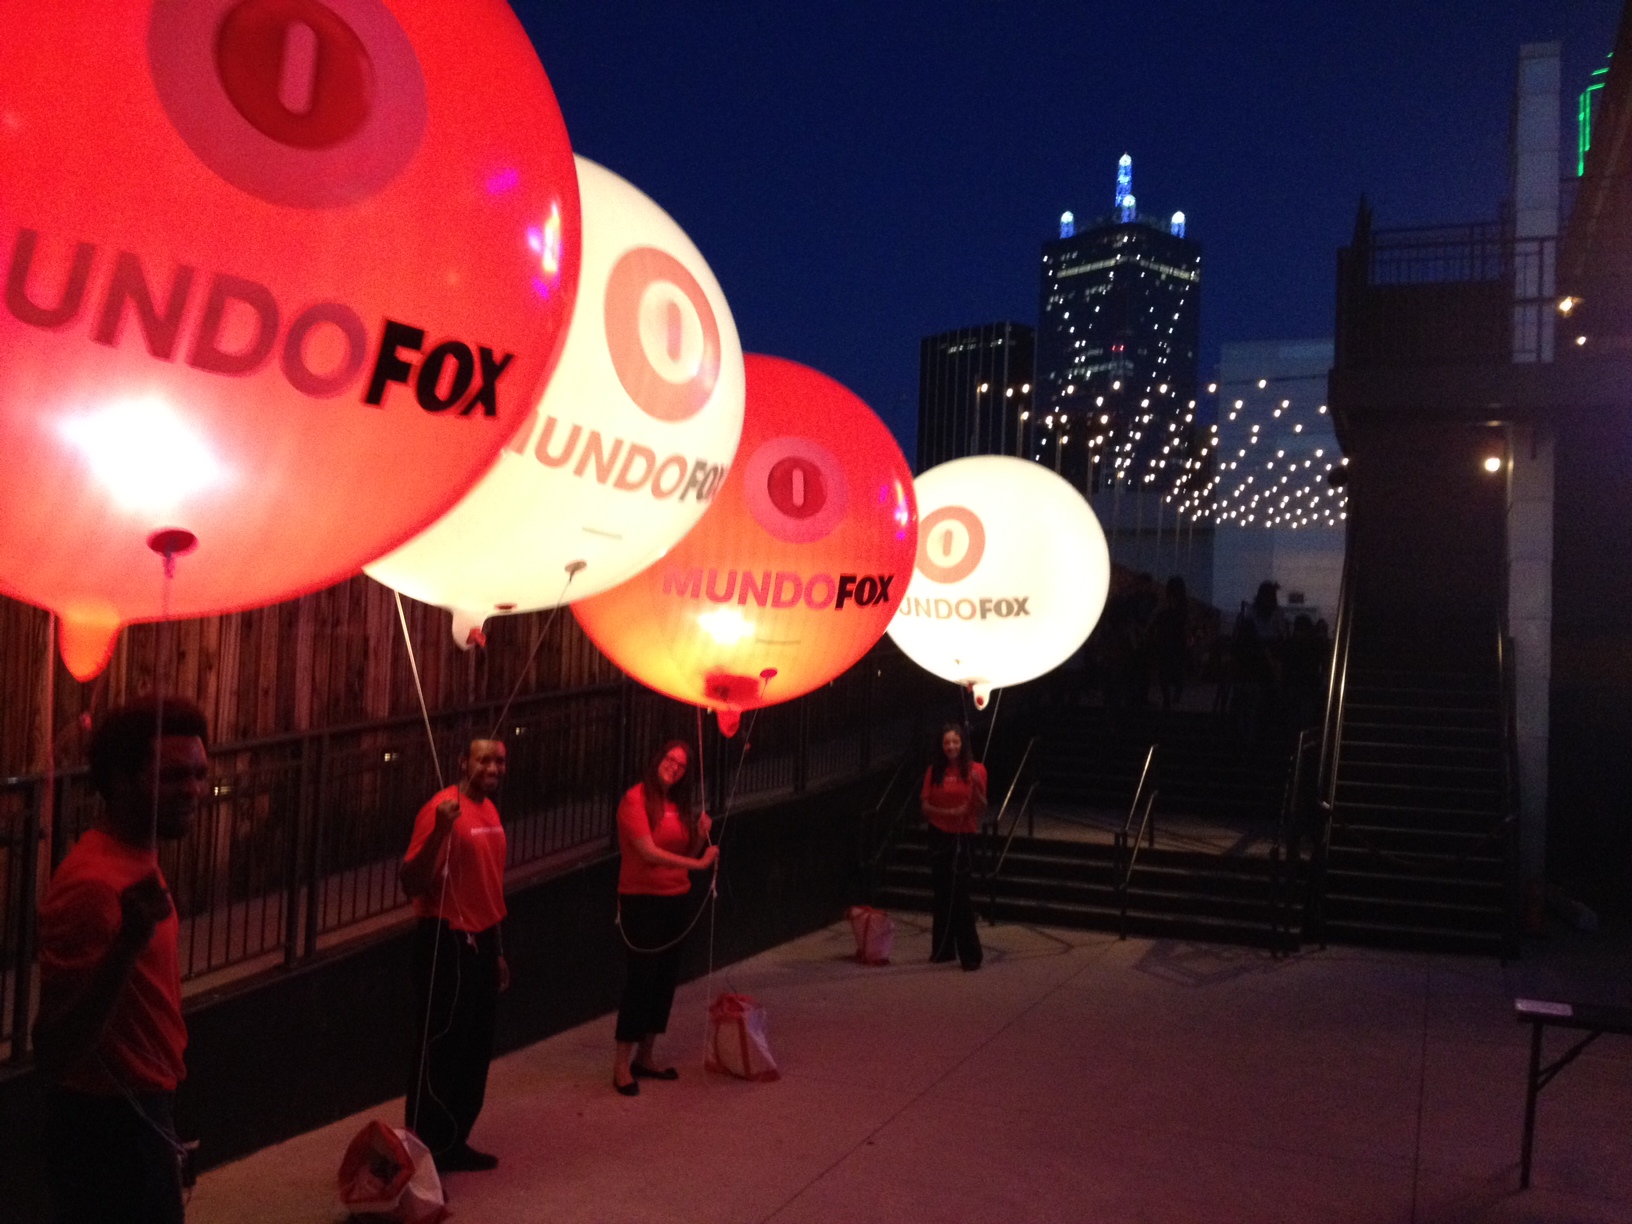 Advertising balloons at an event